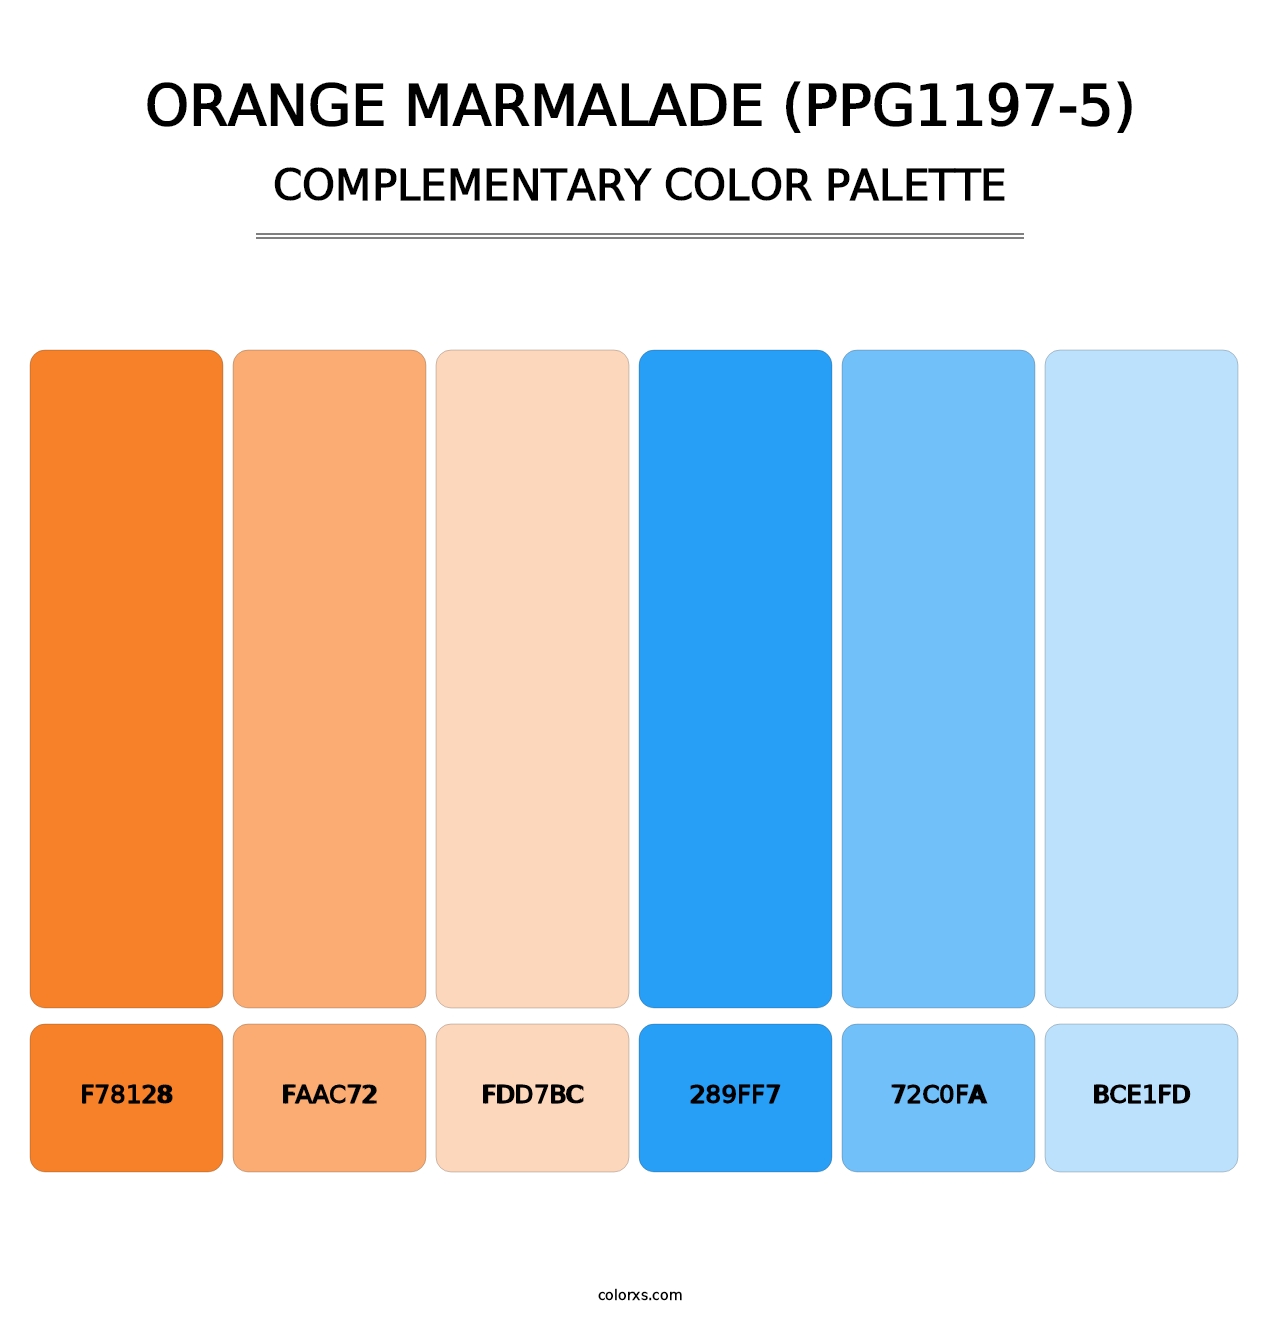 Orange Marmalade (PPG1197-5) - Complementary Color Palette